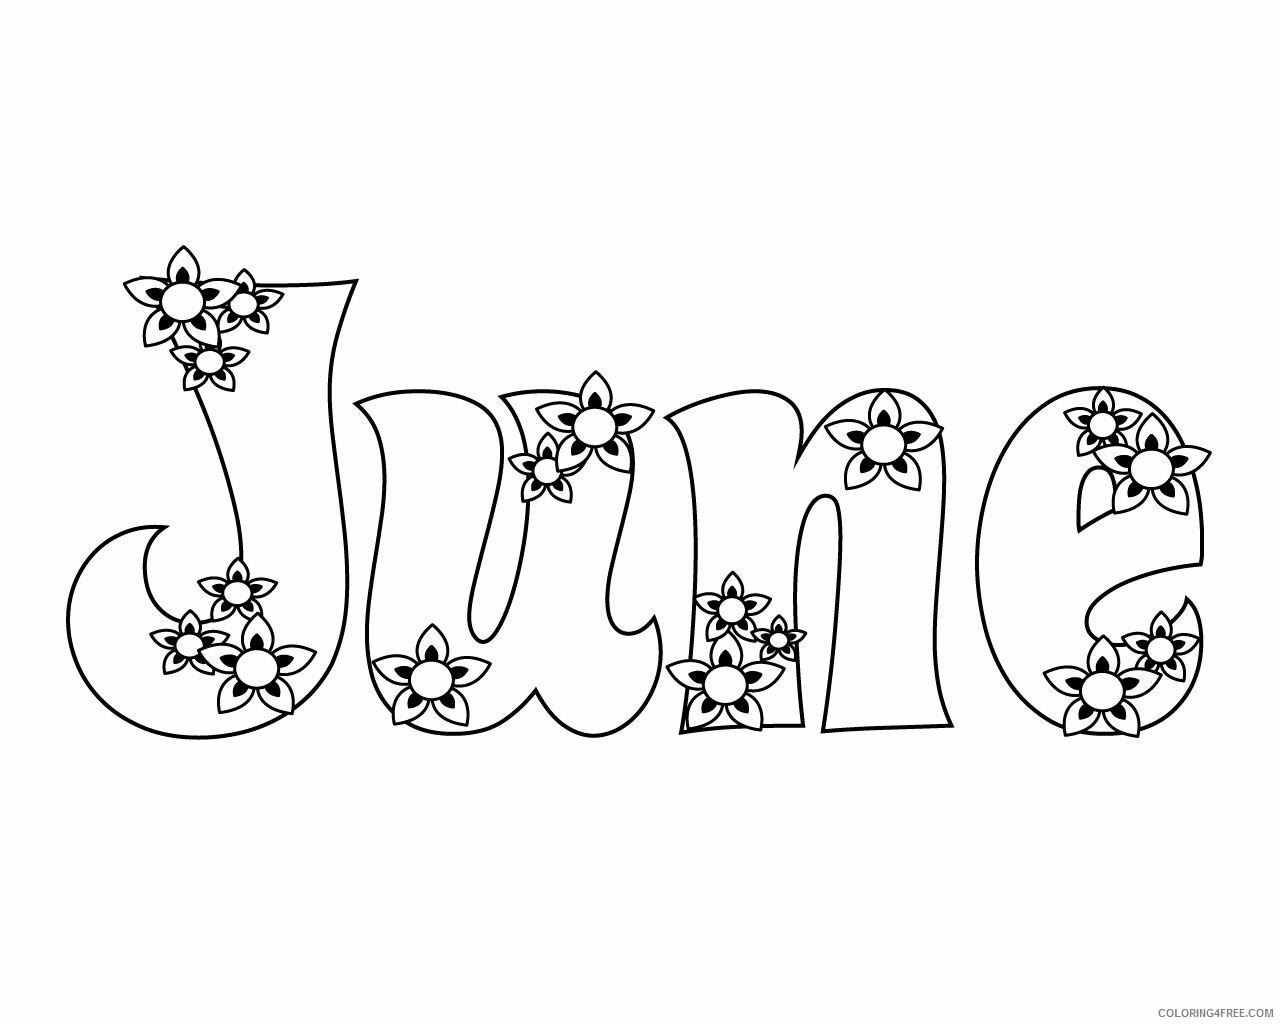 Printable Flower Coloring Pages Flowers Nature June Flowers Printable 2021 414 Coloring4free